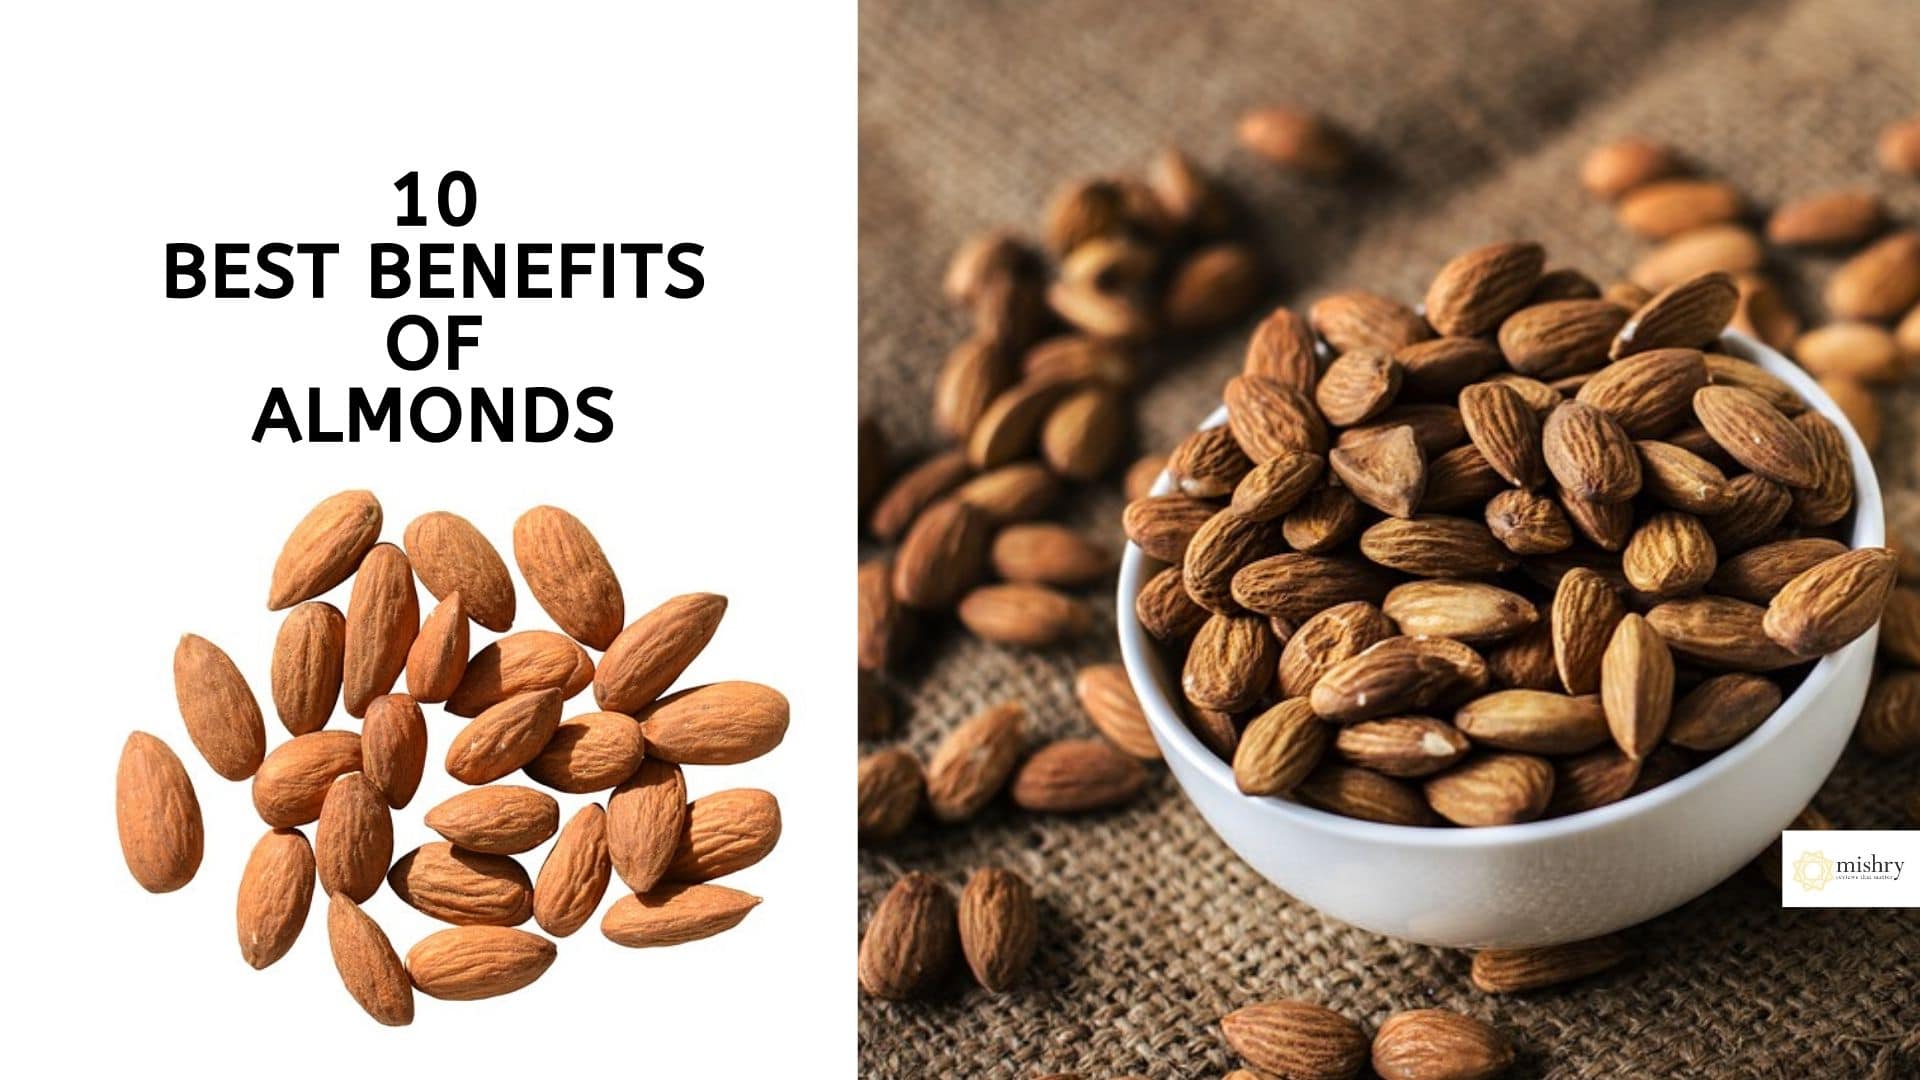 Top 10 Health Benefits of Almonds You Should Definitely Know - Mishry